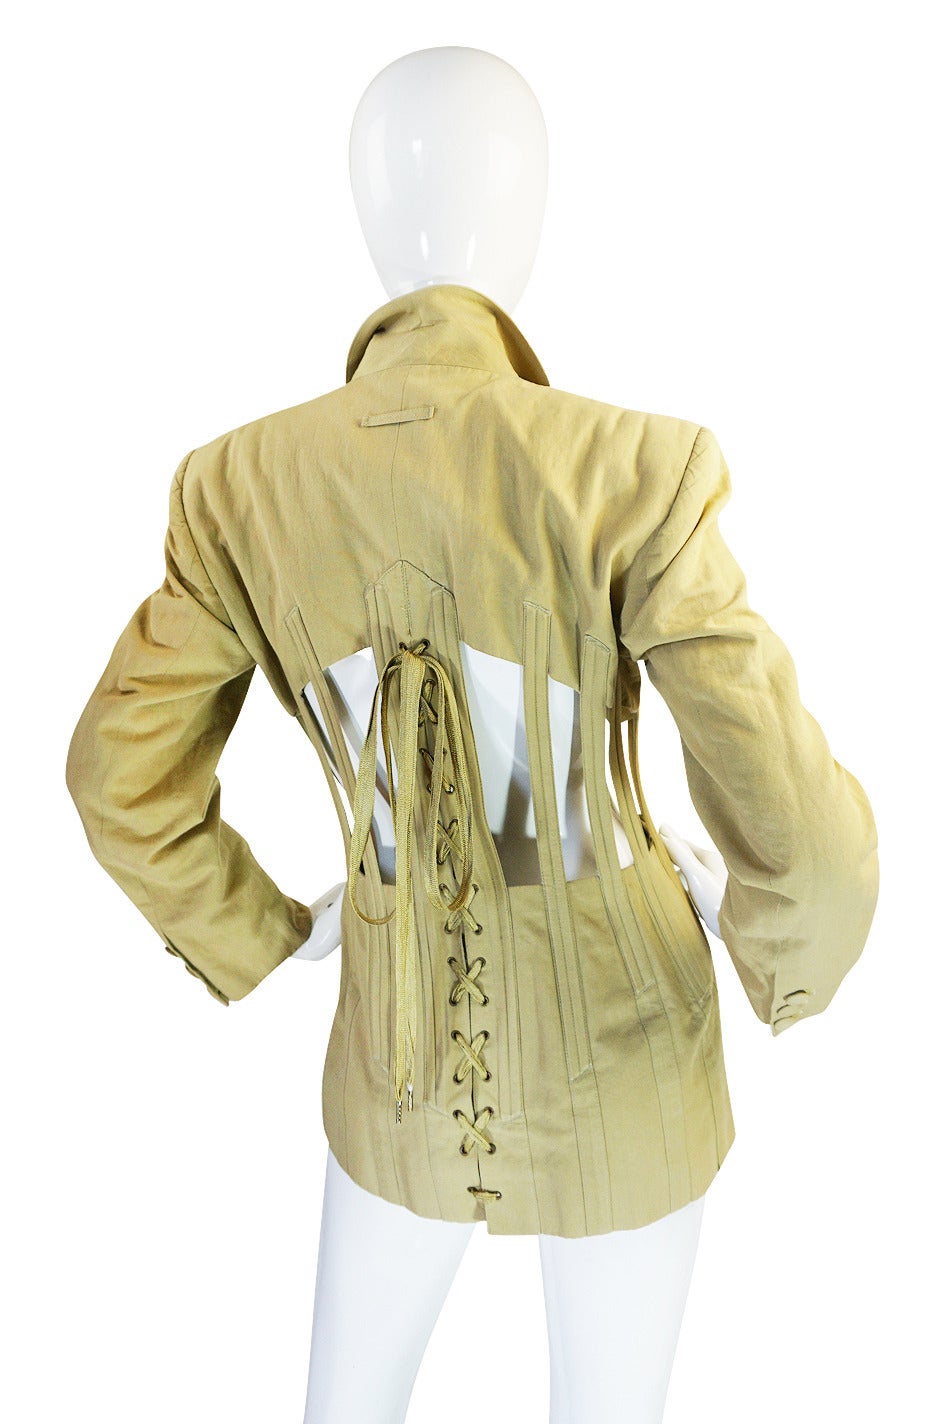 This iconic Jean Paul Gaultier jacket is one of his best known pieces and has issued in a couple of versions even up to recently. This in is dine in a safari green cotton khaki and the color acts like a neutral with most other colors. It has crisp